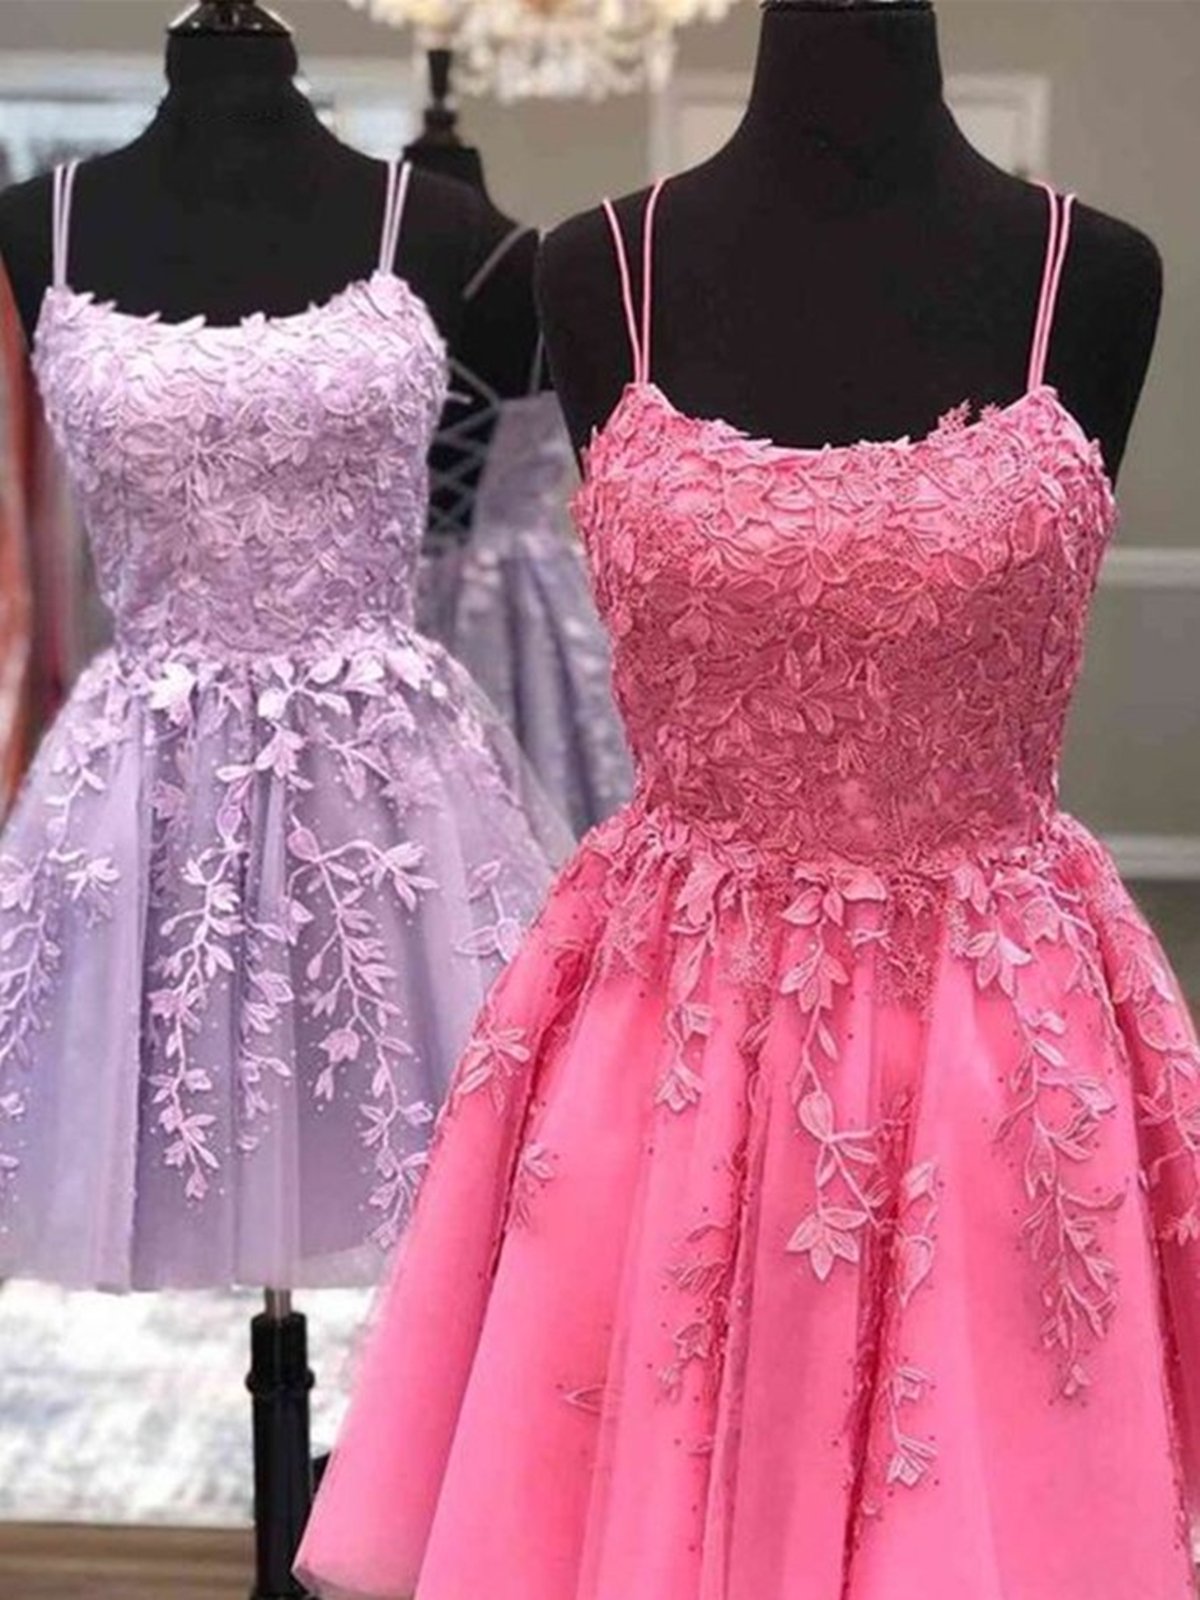 Thin Straps Short Purple Pink Lace Corset Prom Dresses, Short Purple Pink Lace Graduation Corset Homecoming Dresses outfit, Green Dress